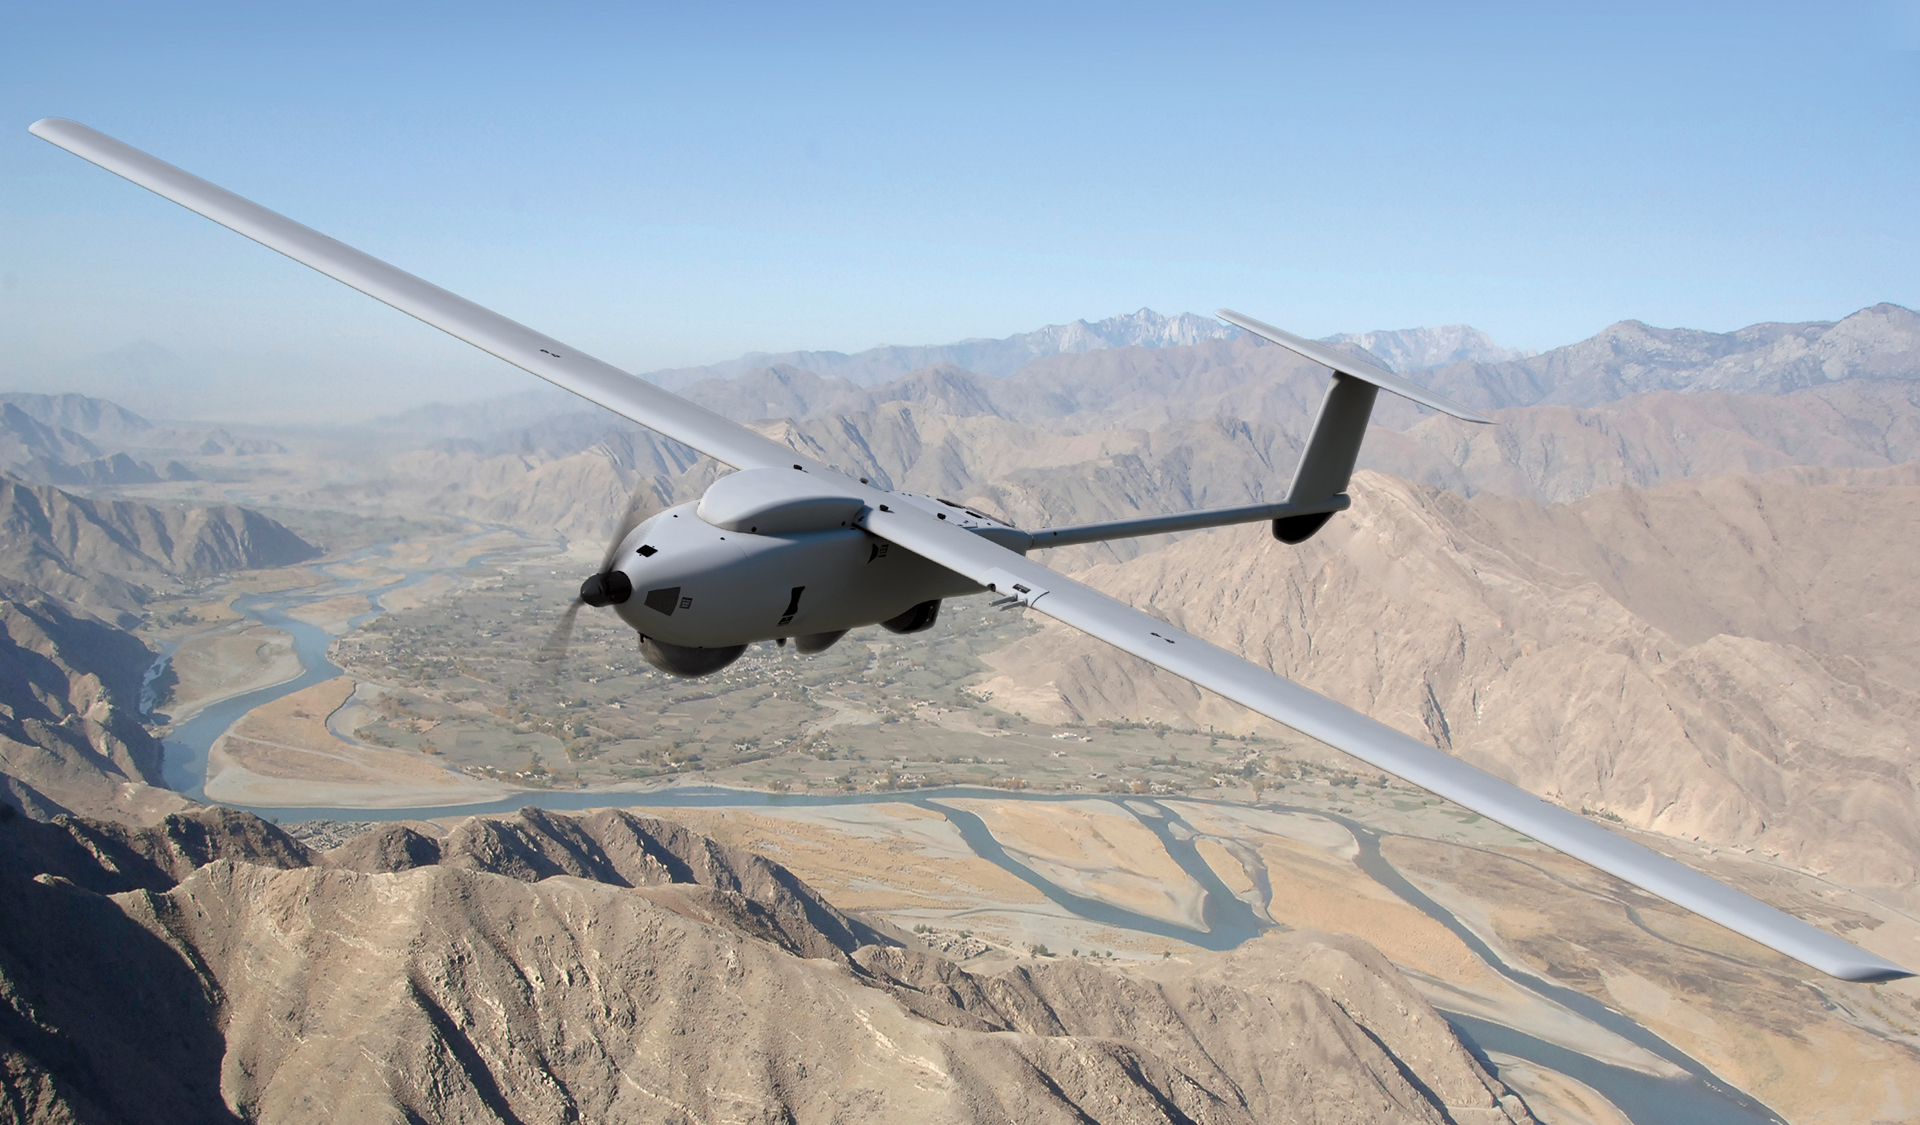 Lockheed Martin UK will deliver more than 260 Indago 4 and Stalker VXE30 drones to the UK for $157.5 million